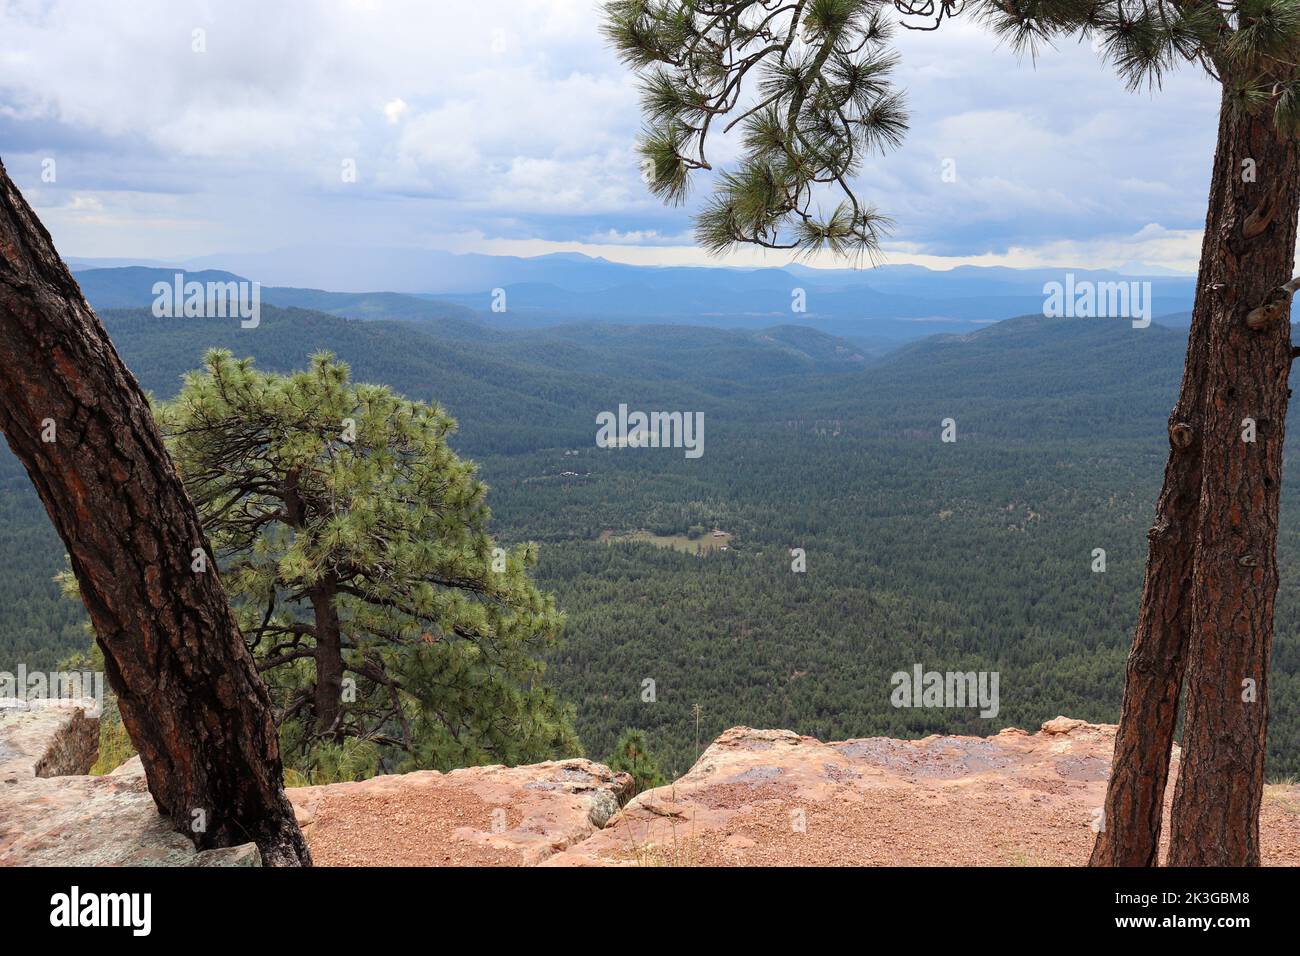 View of the mountains from the road near Woods Canyon Lake in Arizona. Stock Photo